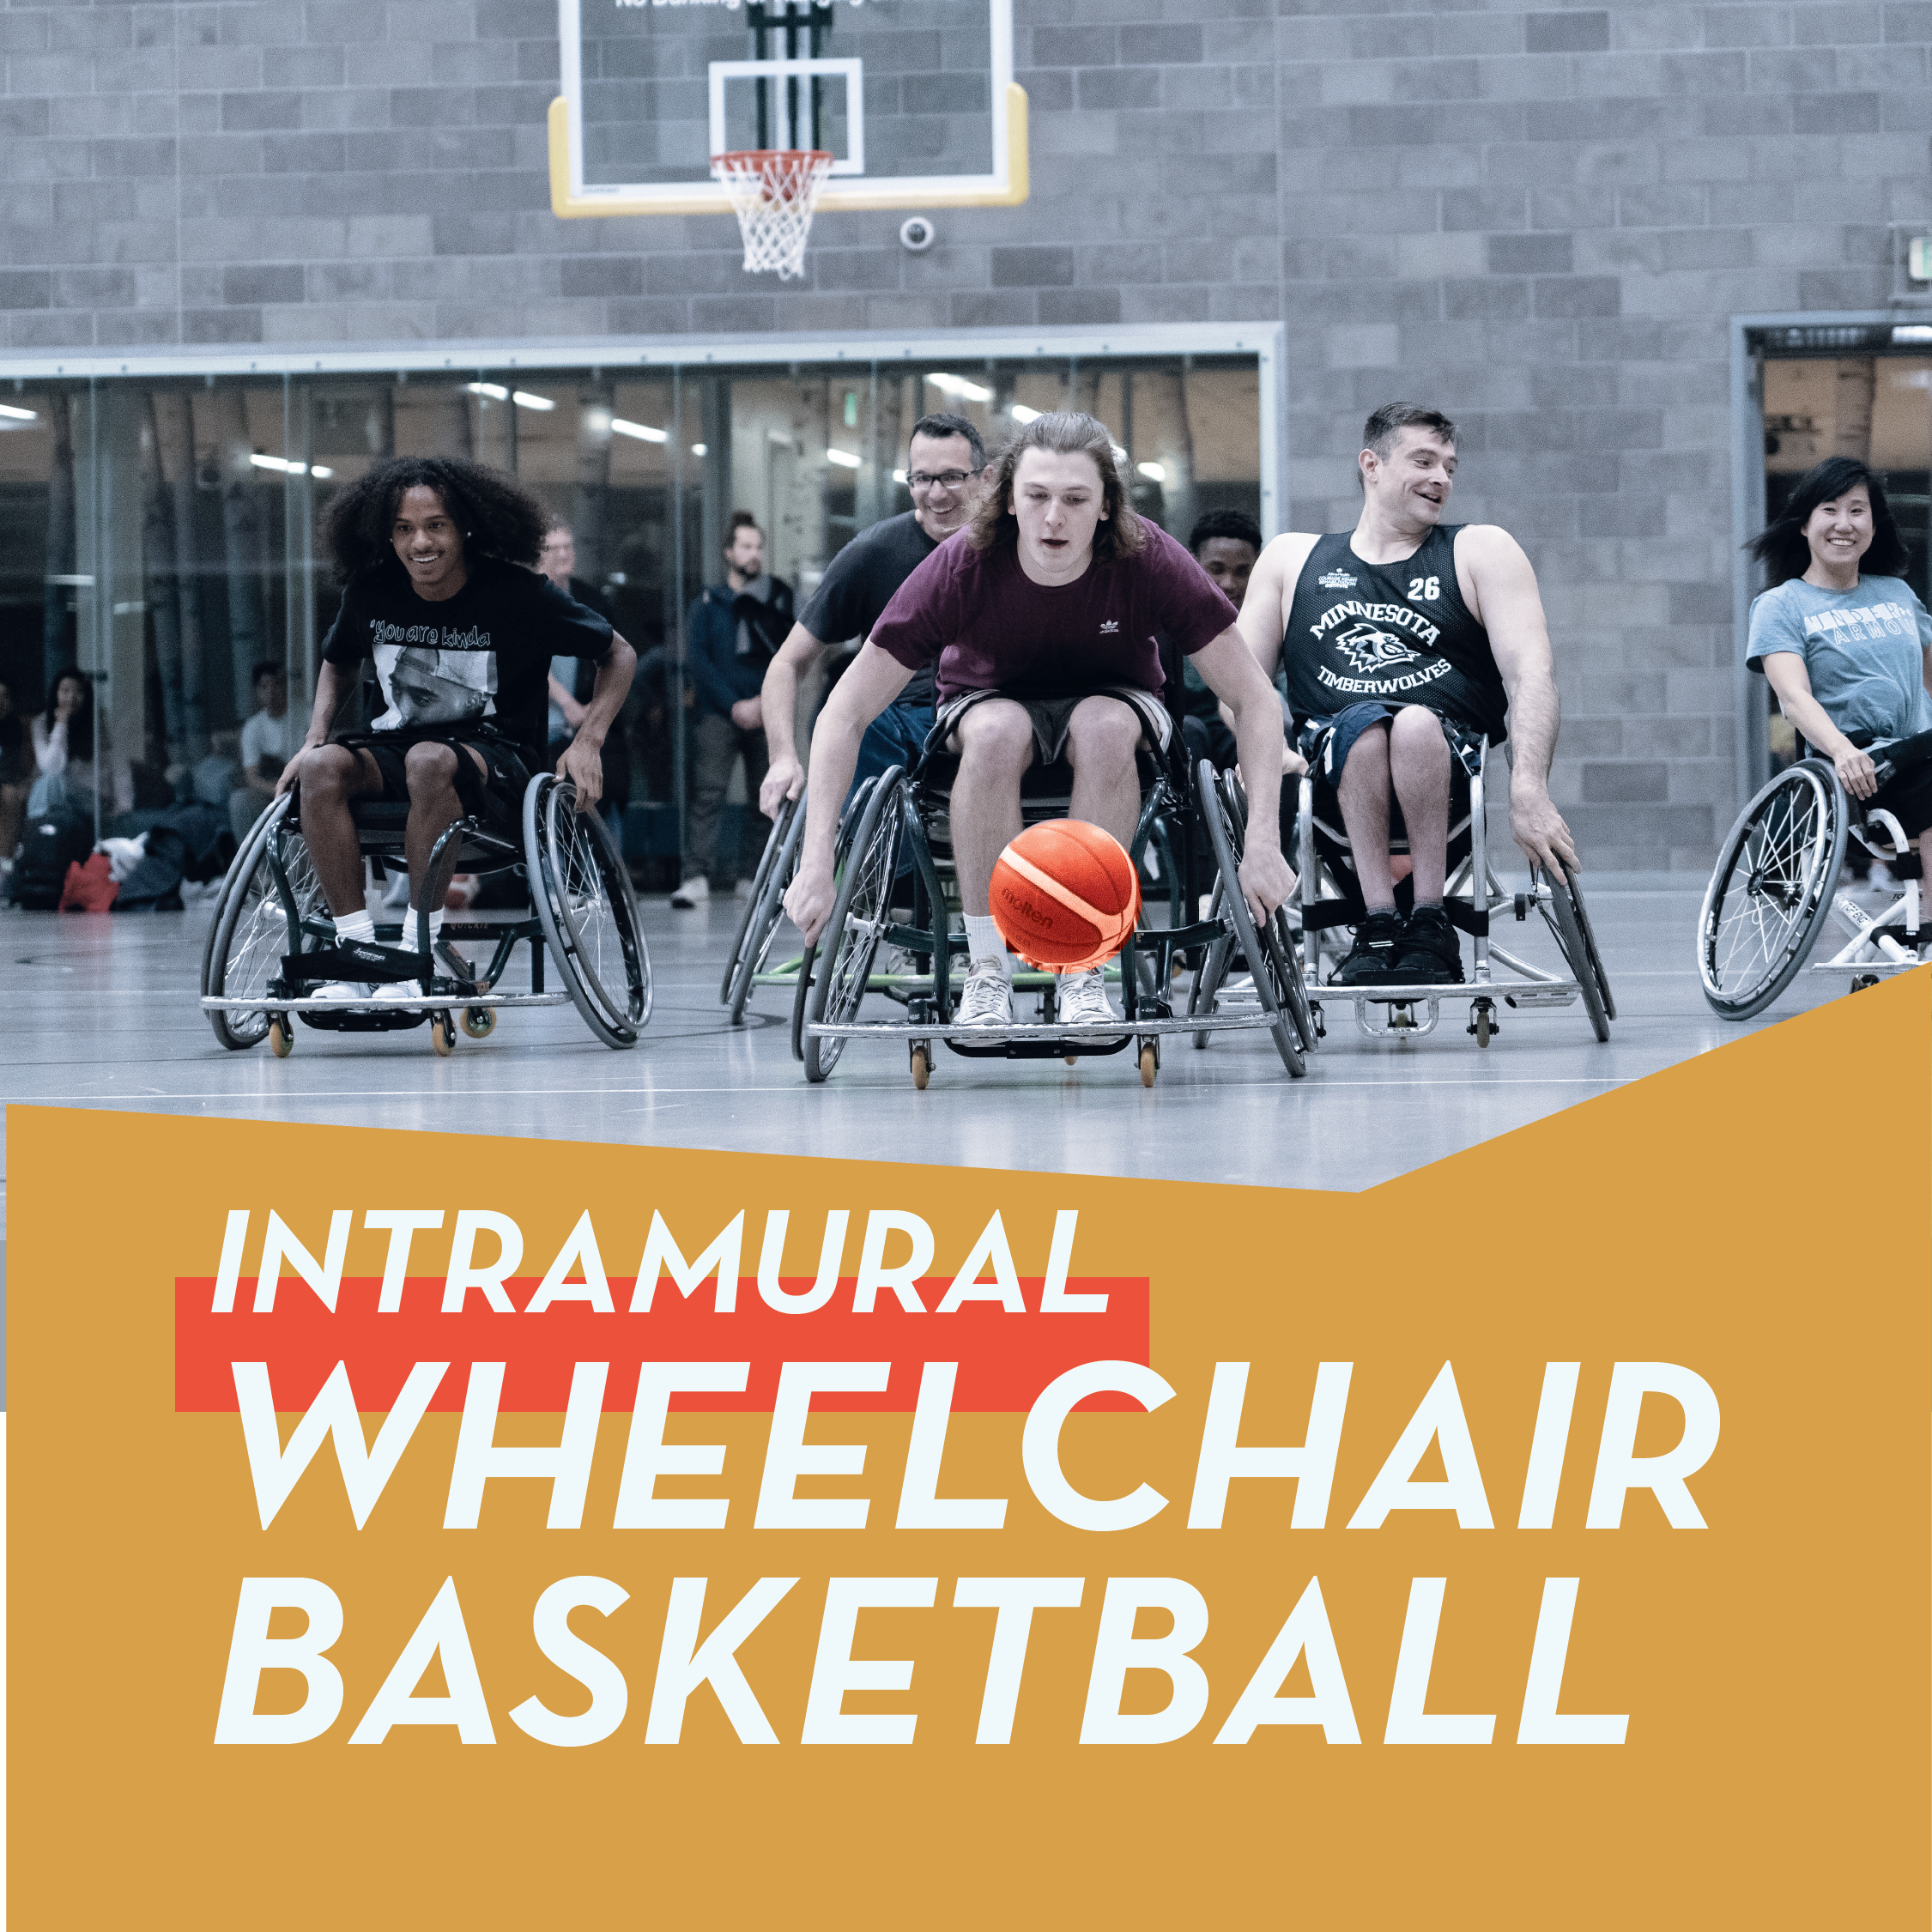 photo of people playing wheelchair basketball at the Minneapolis Recreation & Wellness center with text saying "intramural wheelchair basketball"